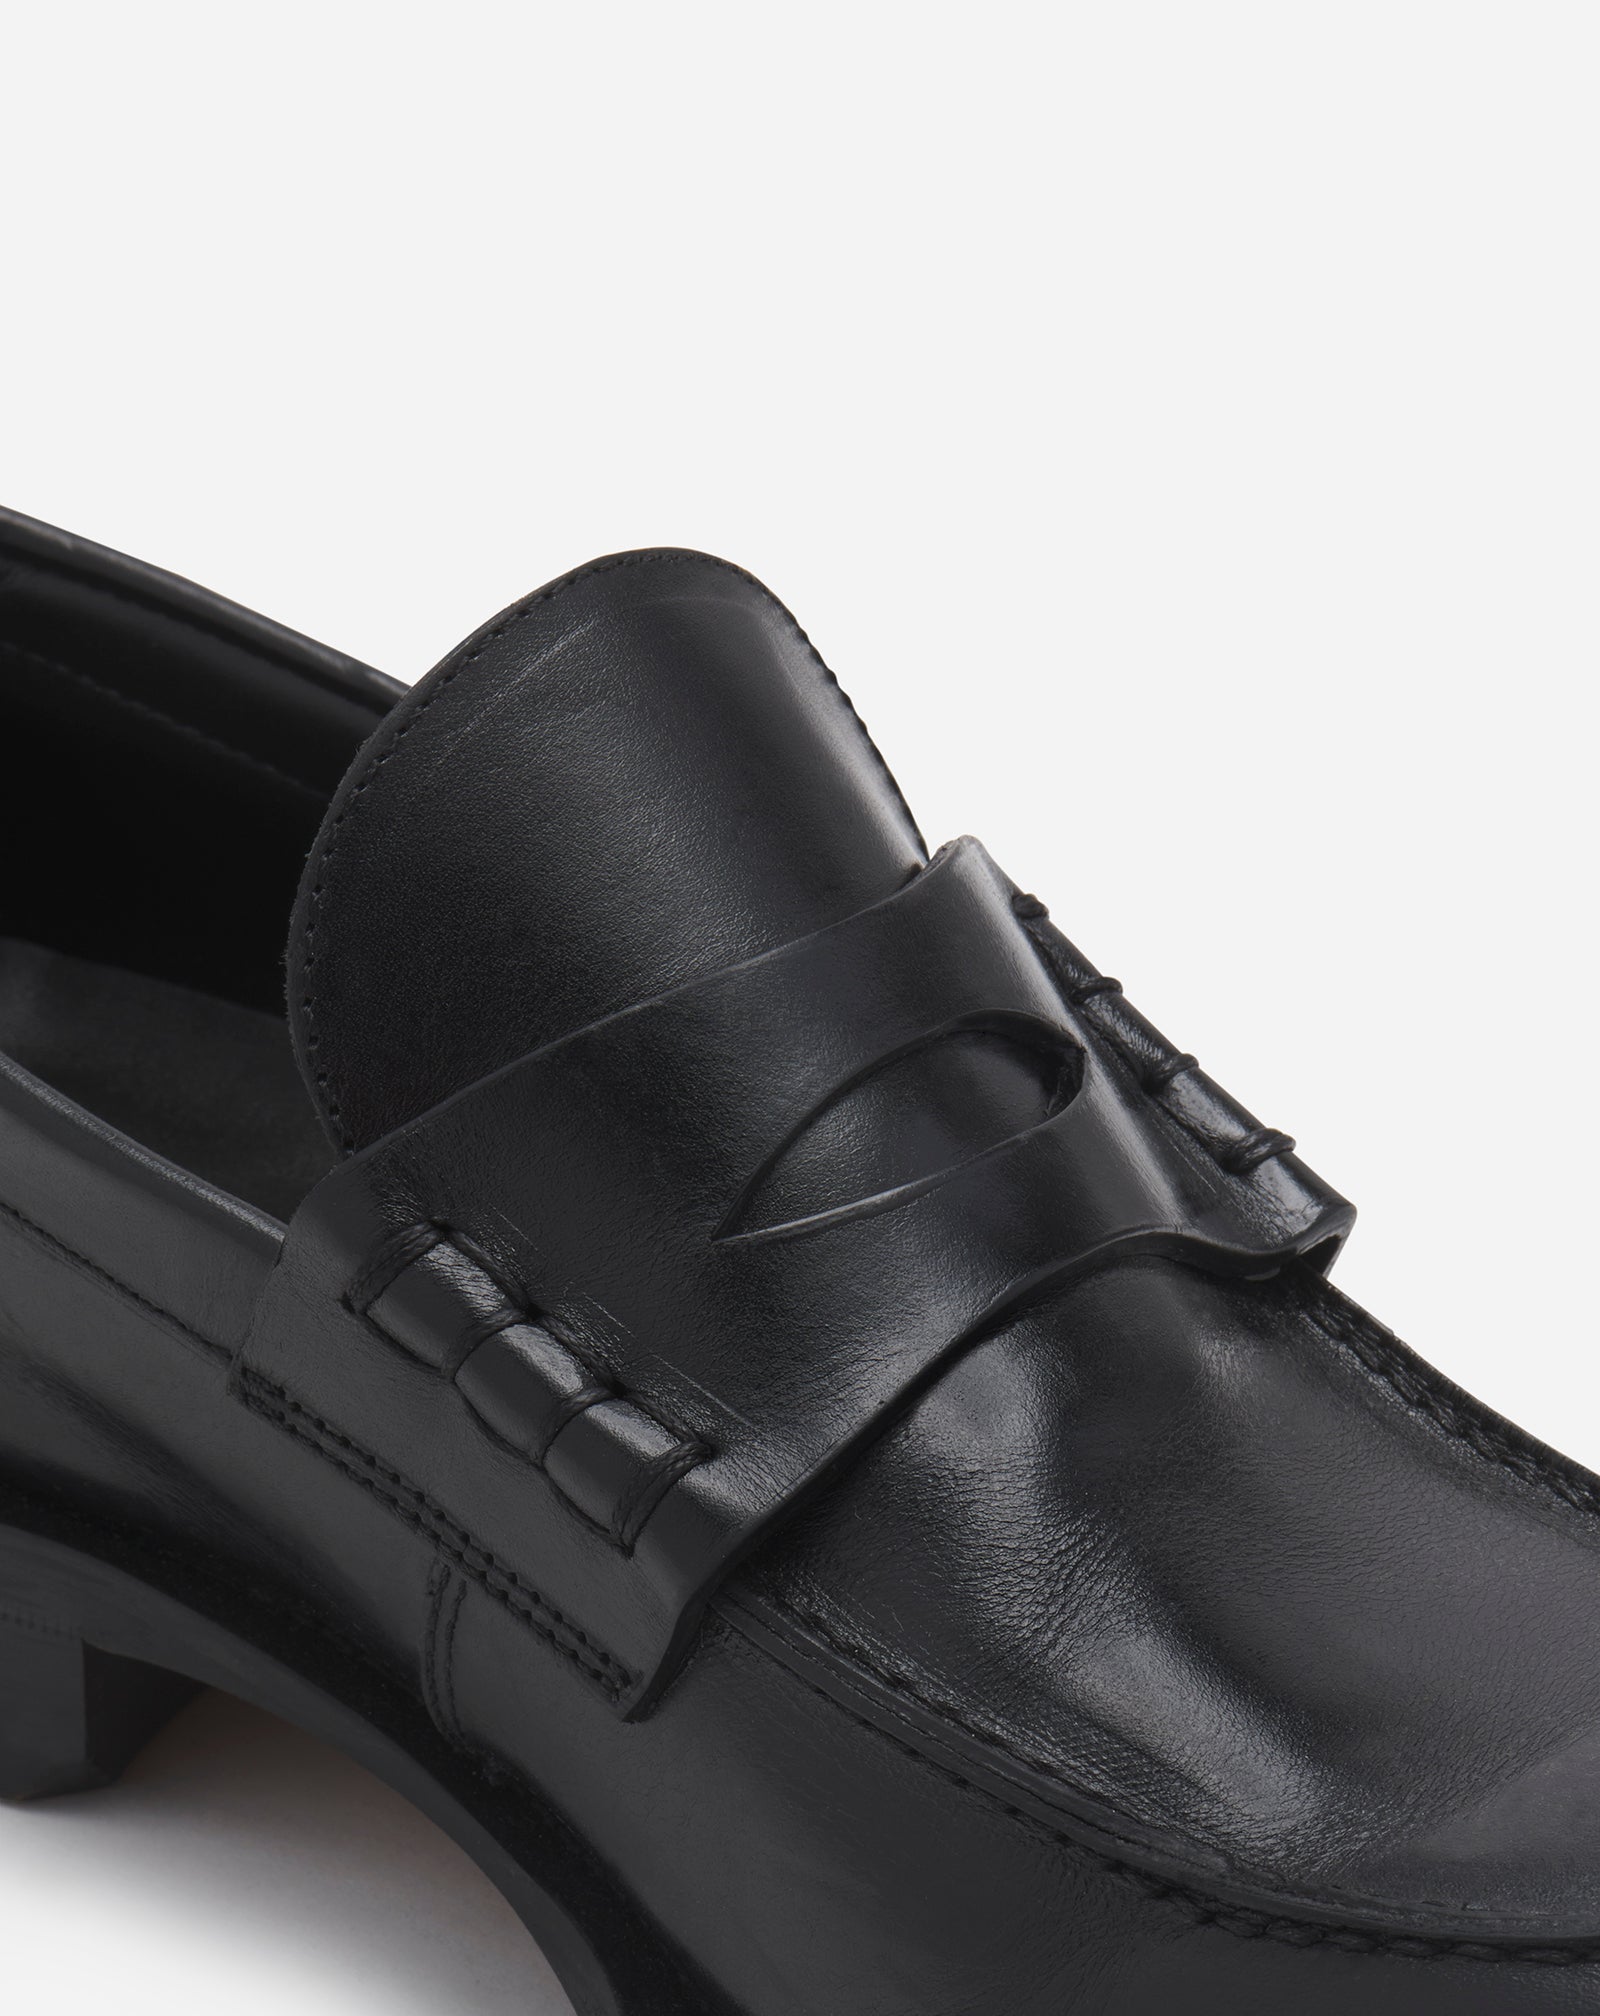 LEATHER MEDLEY LOAFERS